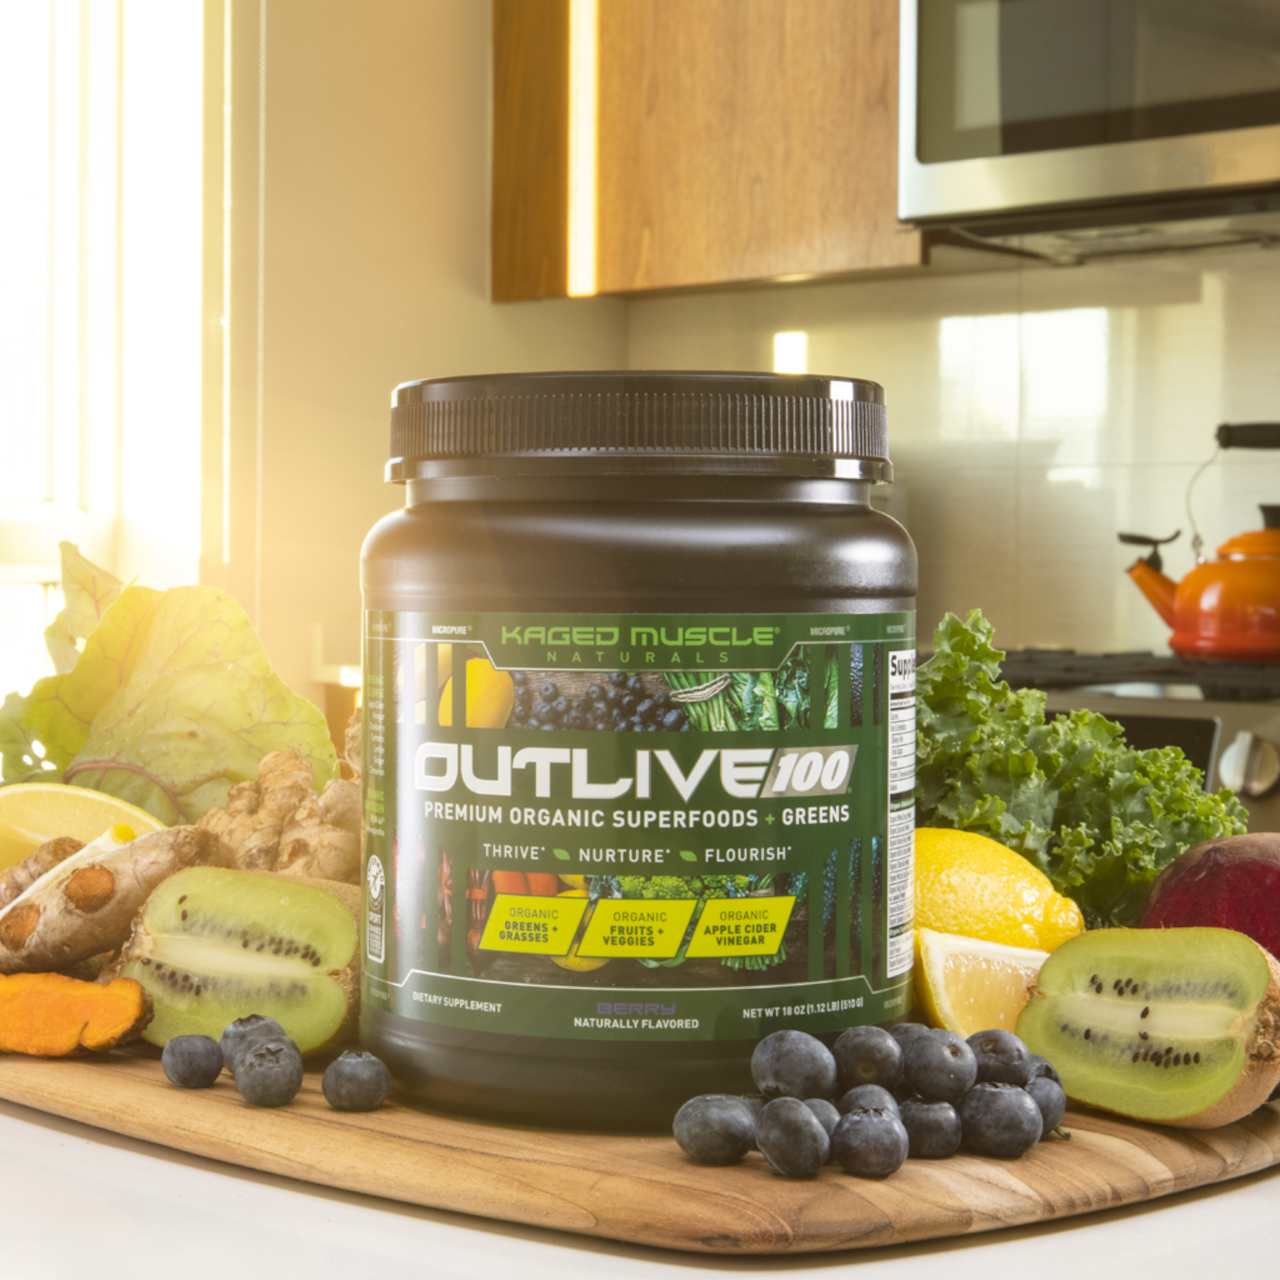 Great-Tasting Superfoods Powder? Kaged Outlive 100 Now in Lemon! 